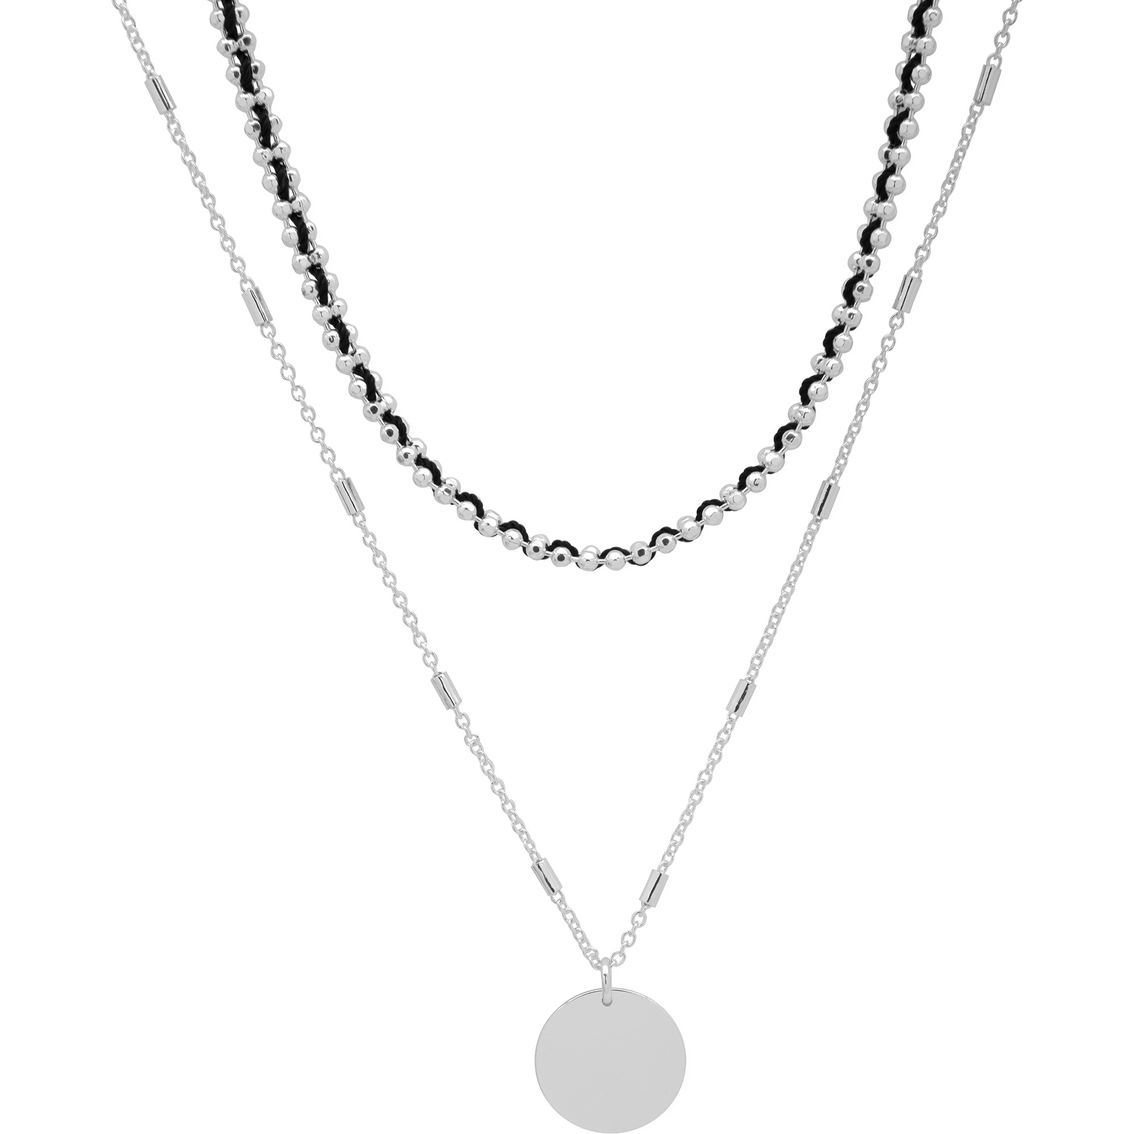 Nine West Silvertone Woven Black Thread Pendant Necklace | Other ...